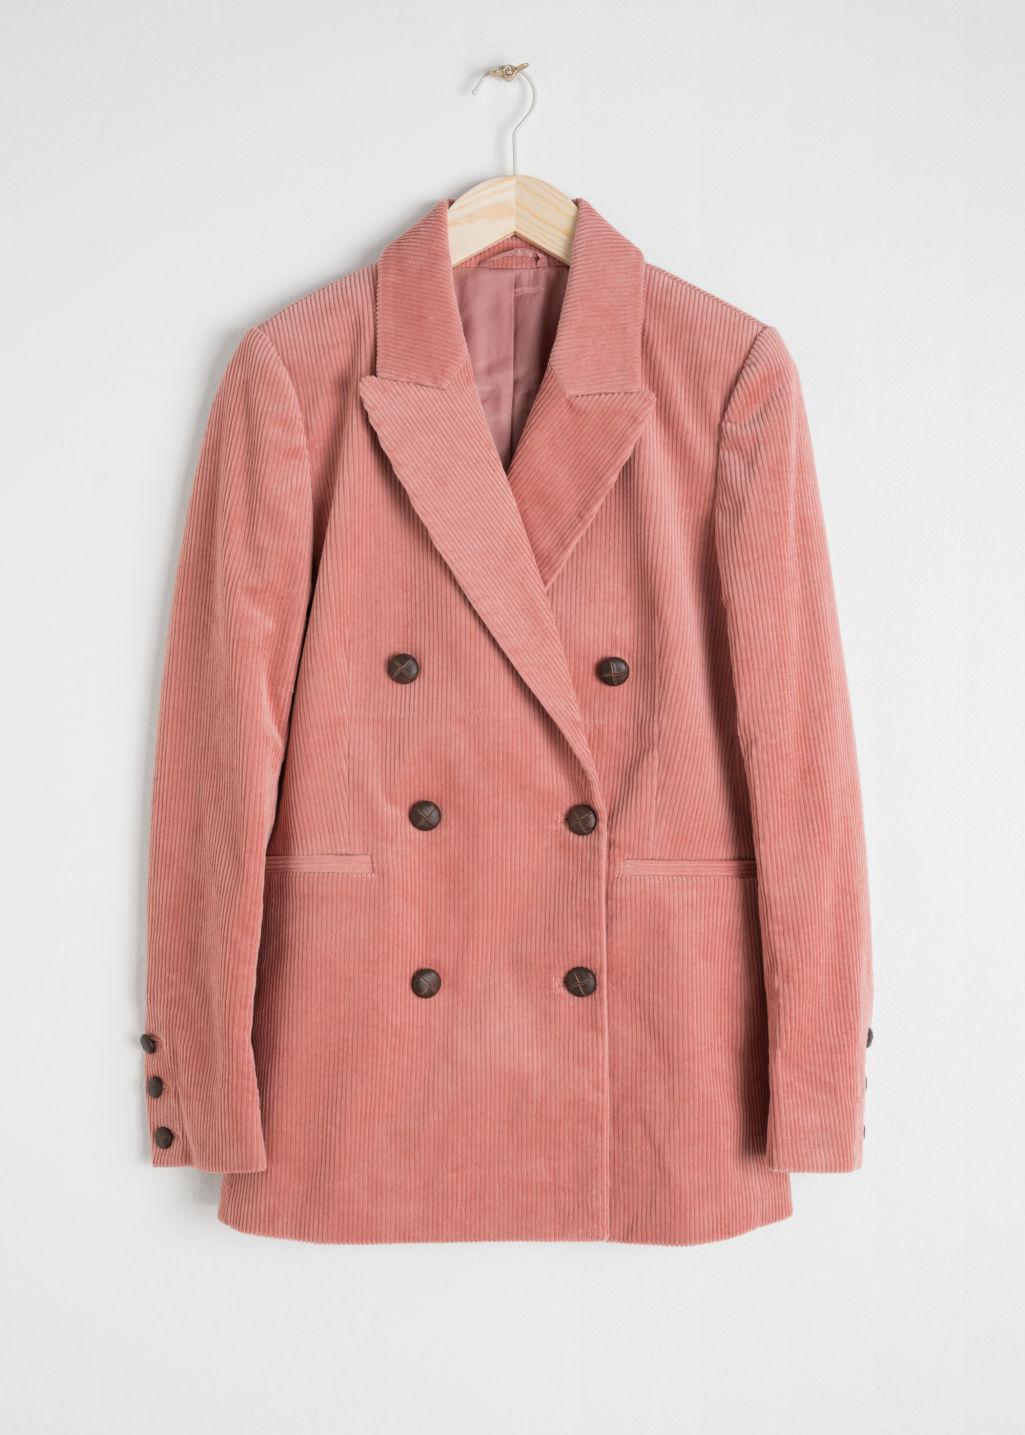 & Other Stories Double Breasted Corduroy Blazer in Pink | Lyst